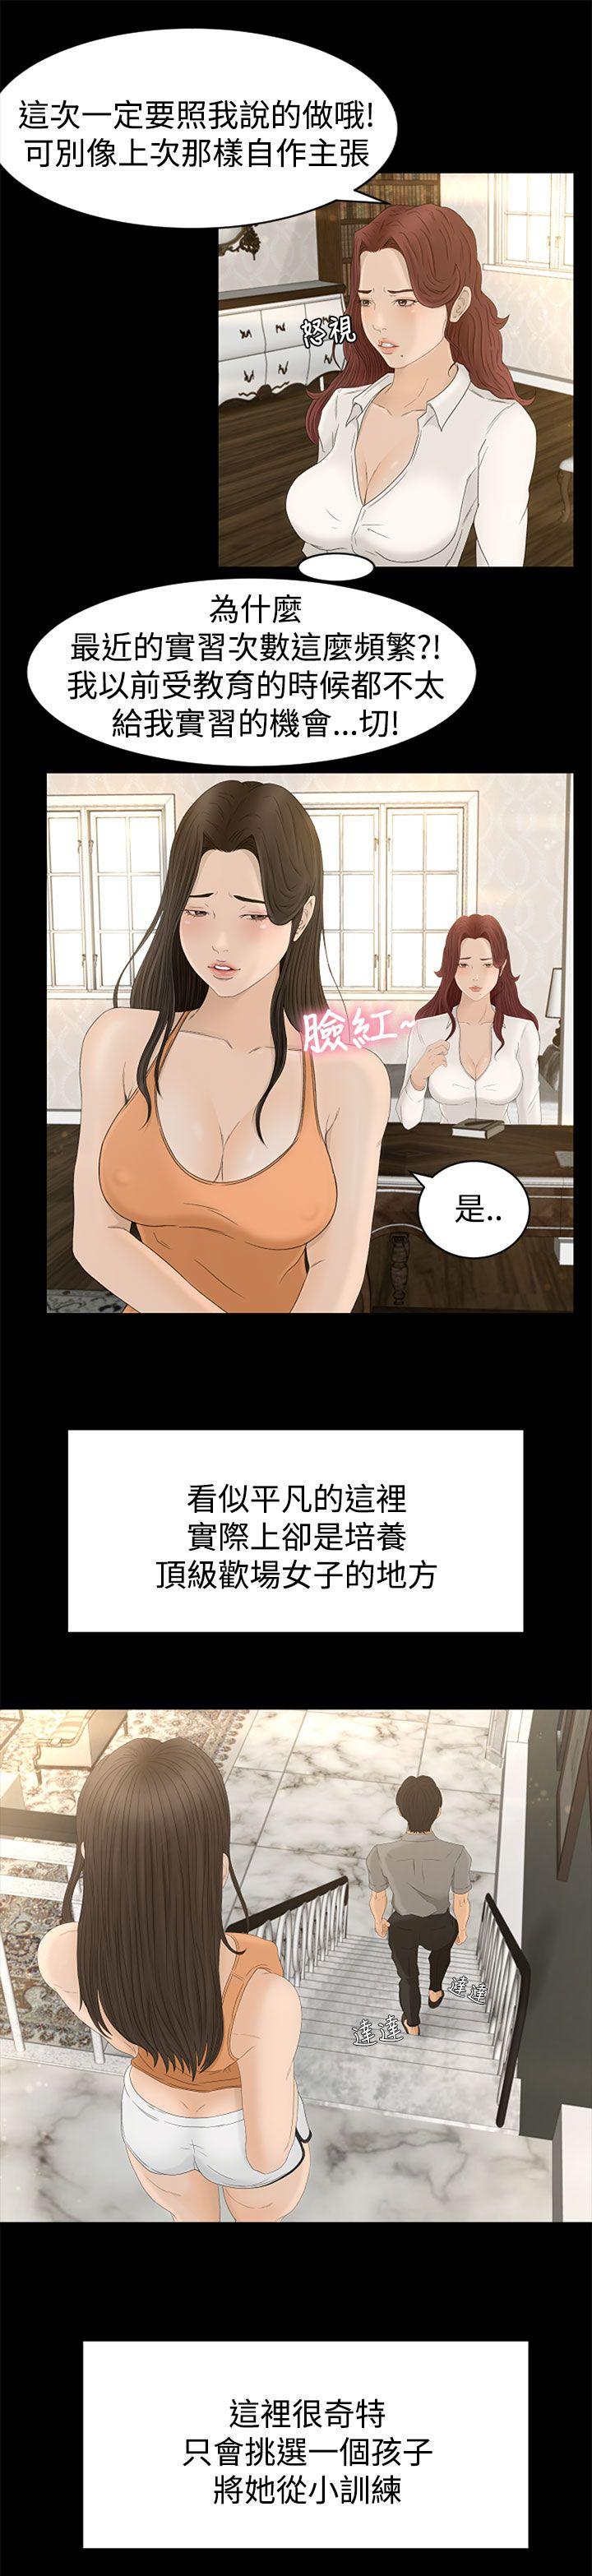 Tranny 猎物 第1話 [Chinese]中文 Calle - Page 12